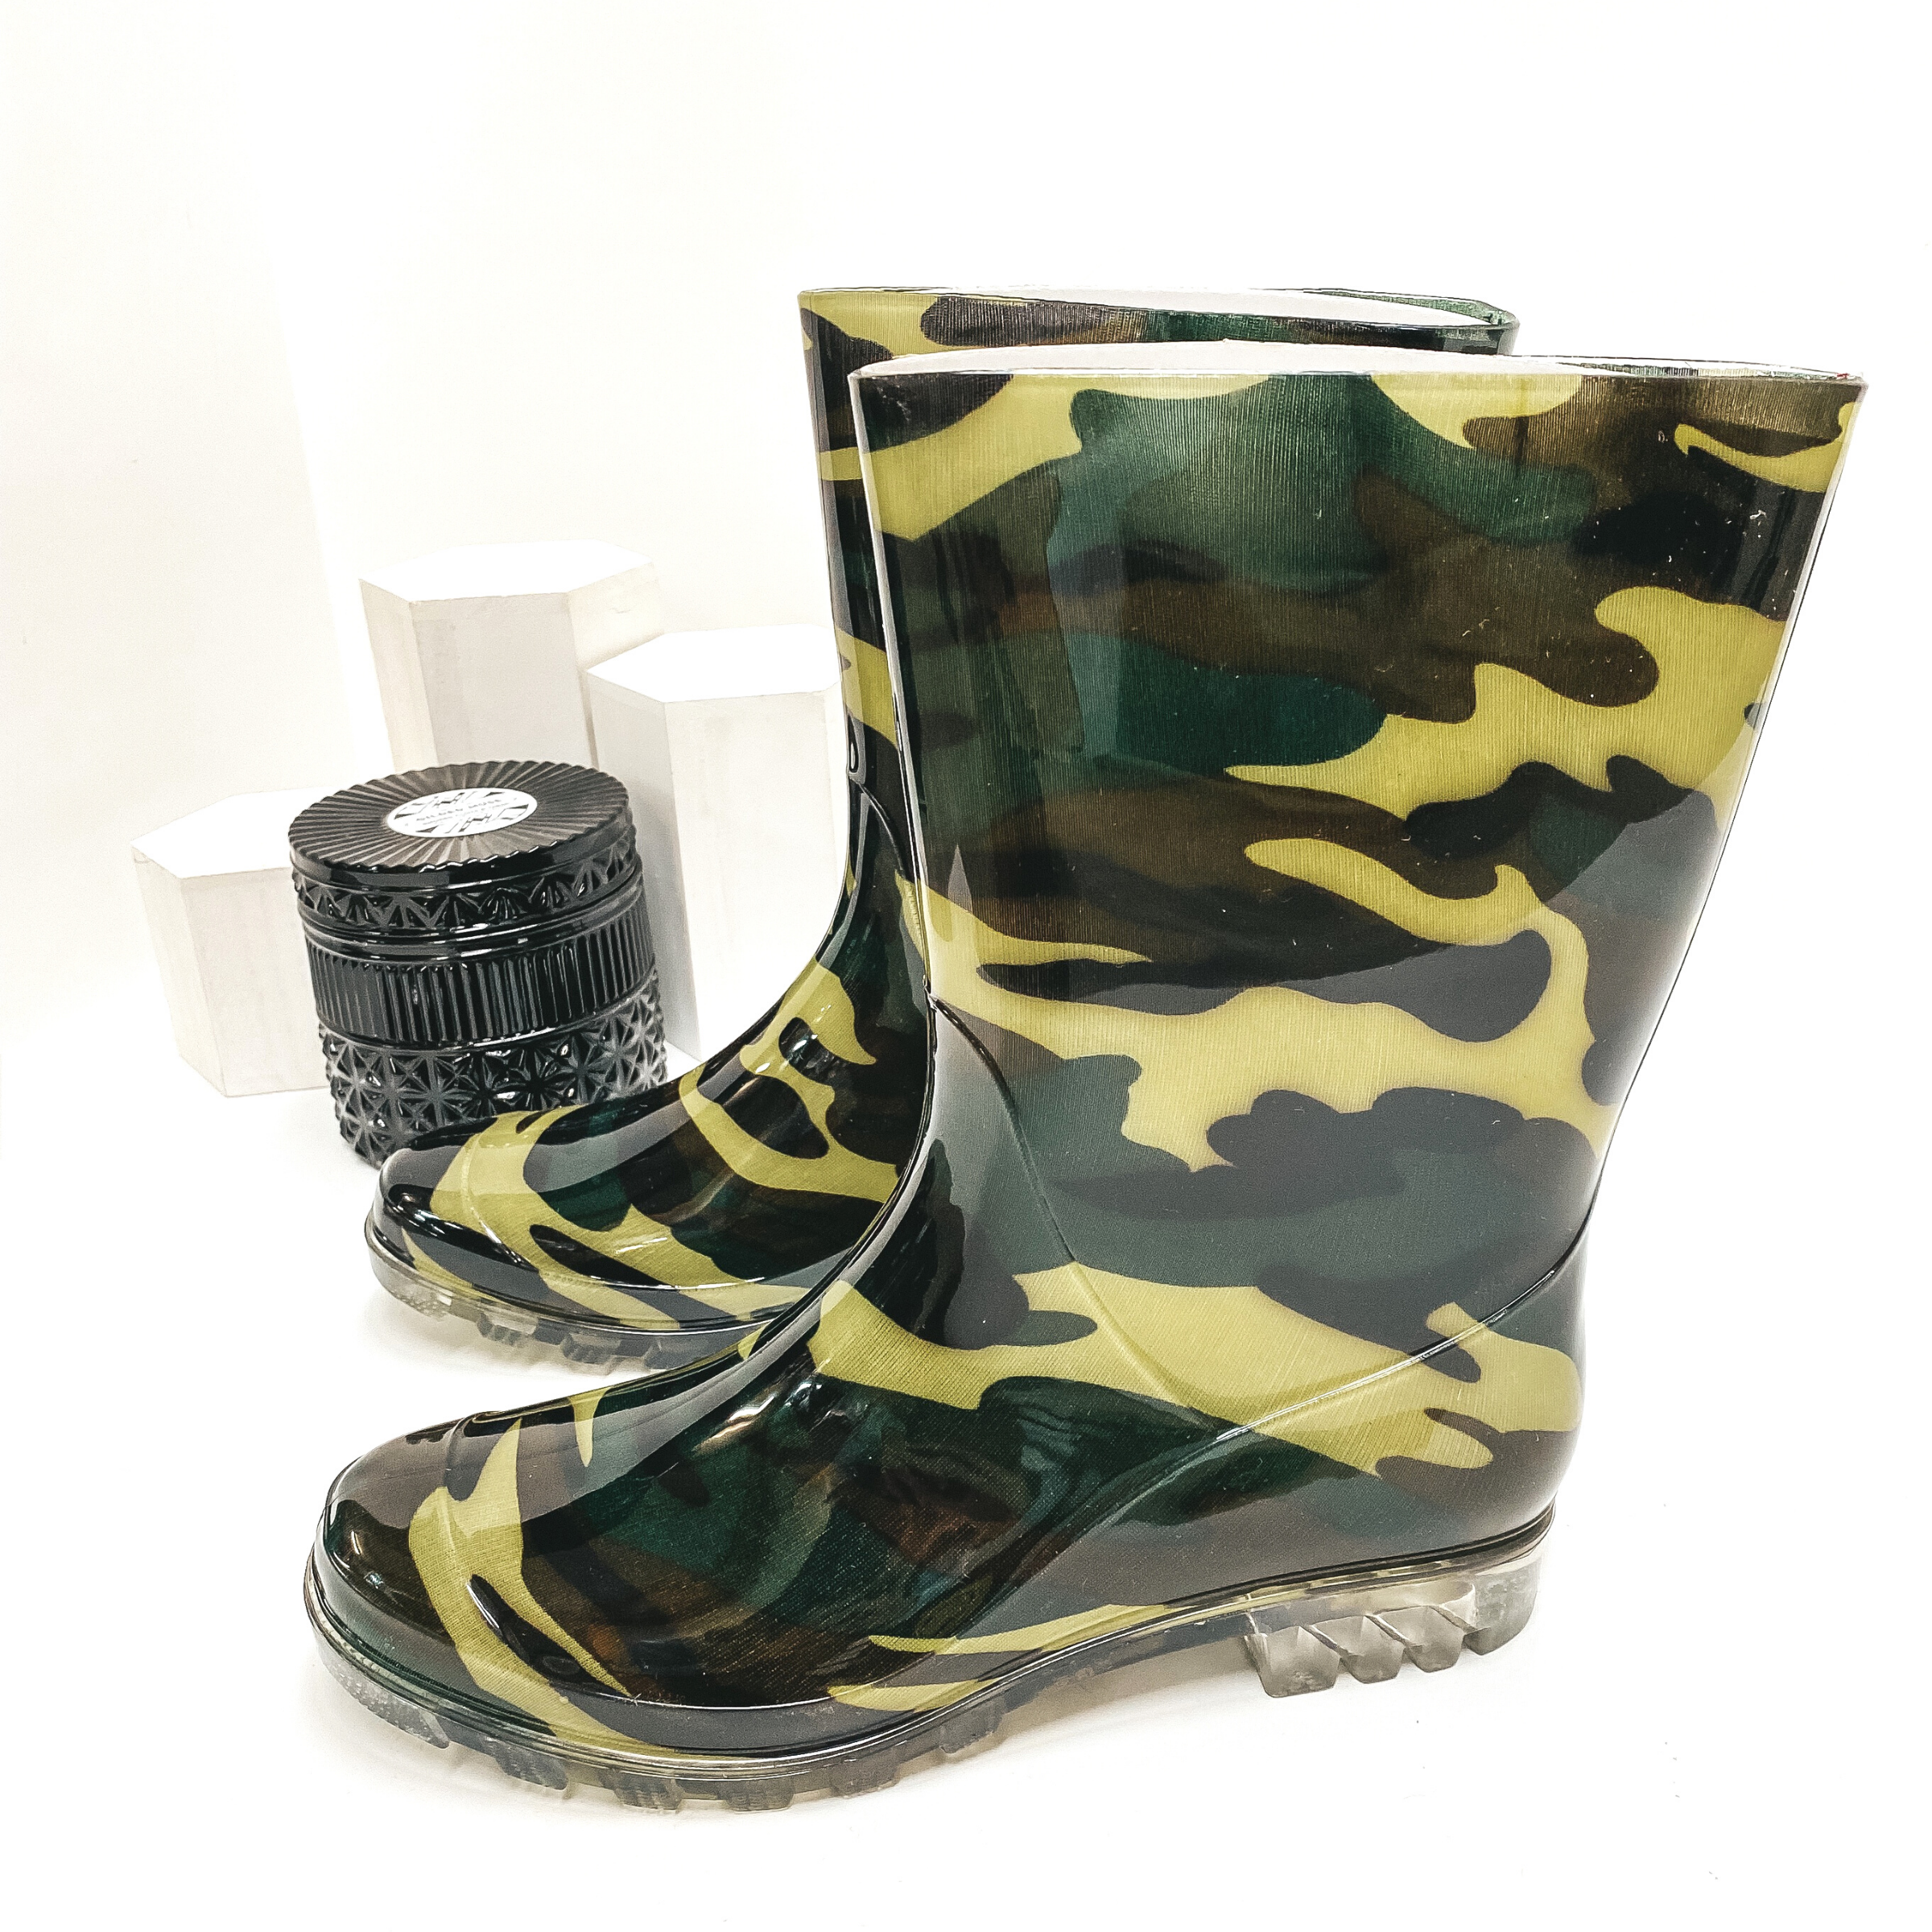 Green camouflage calf high rubber boots. Pictured on white background.